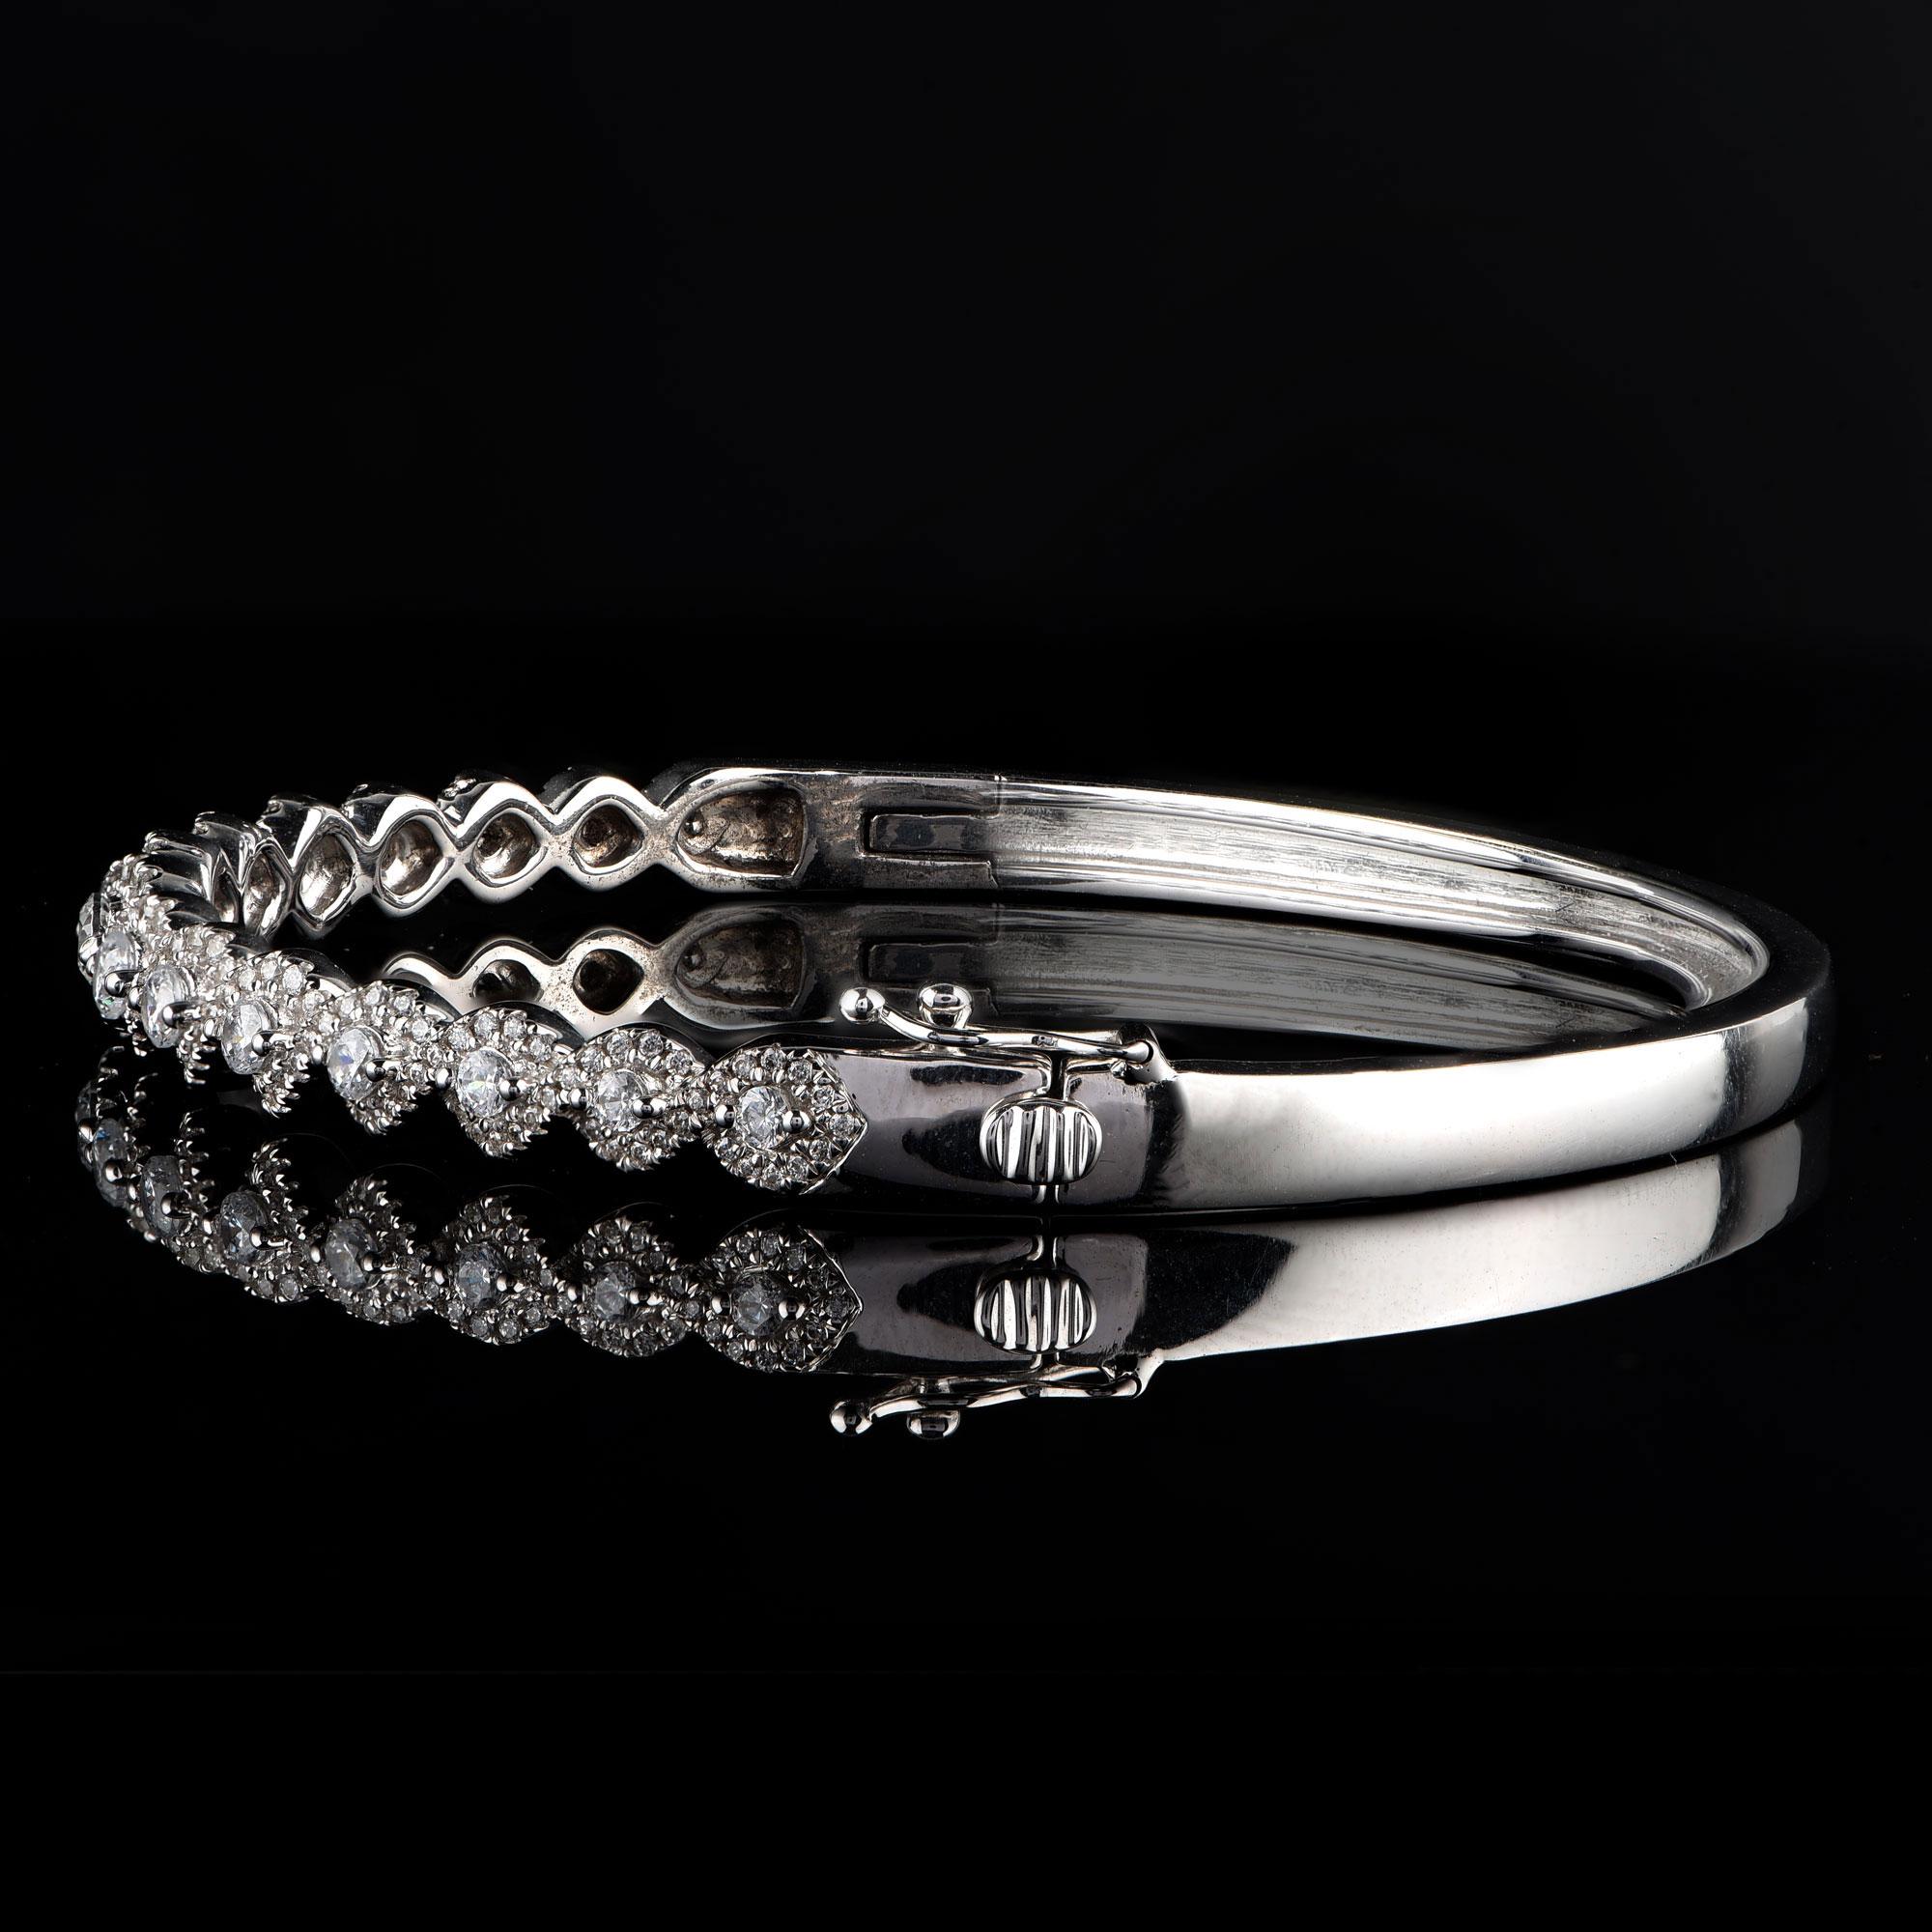 TJD 1.50 Carat Diamond 18 Karat White Gold Braided Designer Bangle In New Condition For Sale In New York, NY